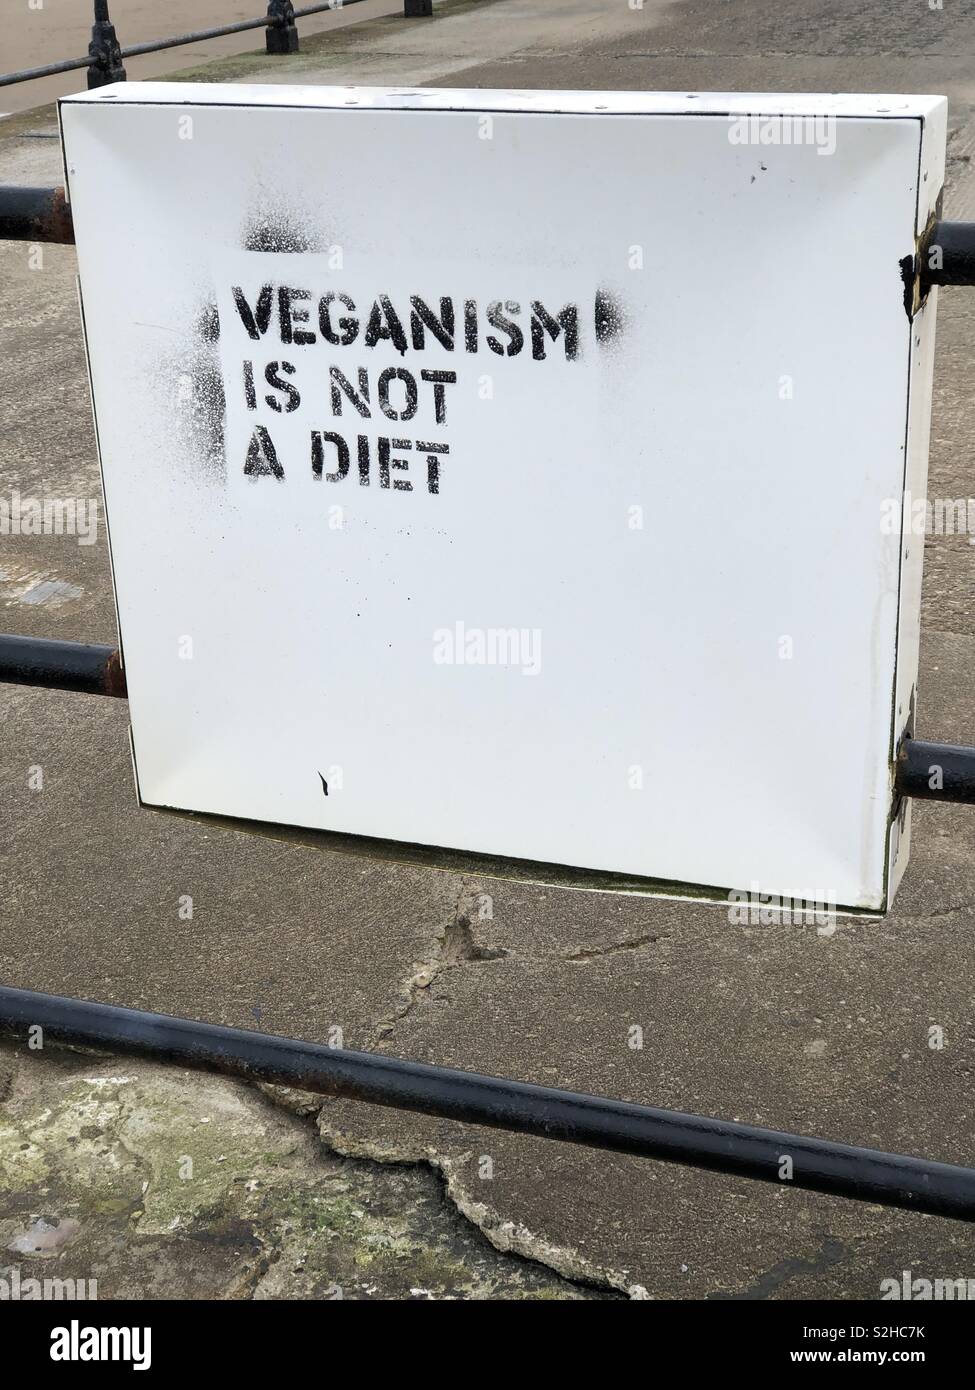 Black spray-painted graffiti stating that Veganism is not a diet Stock Photo